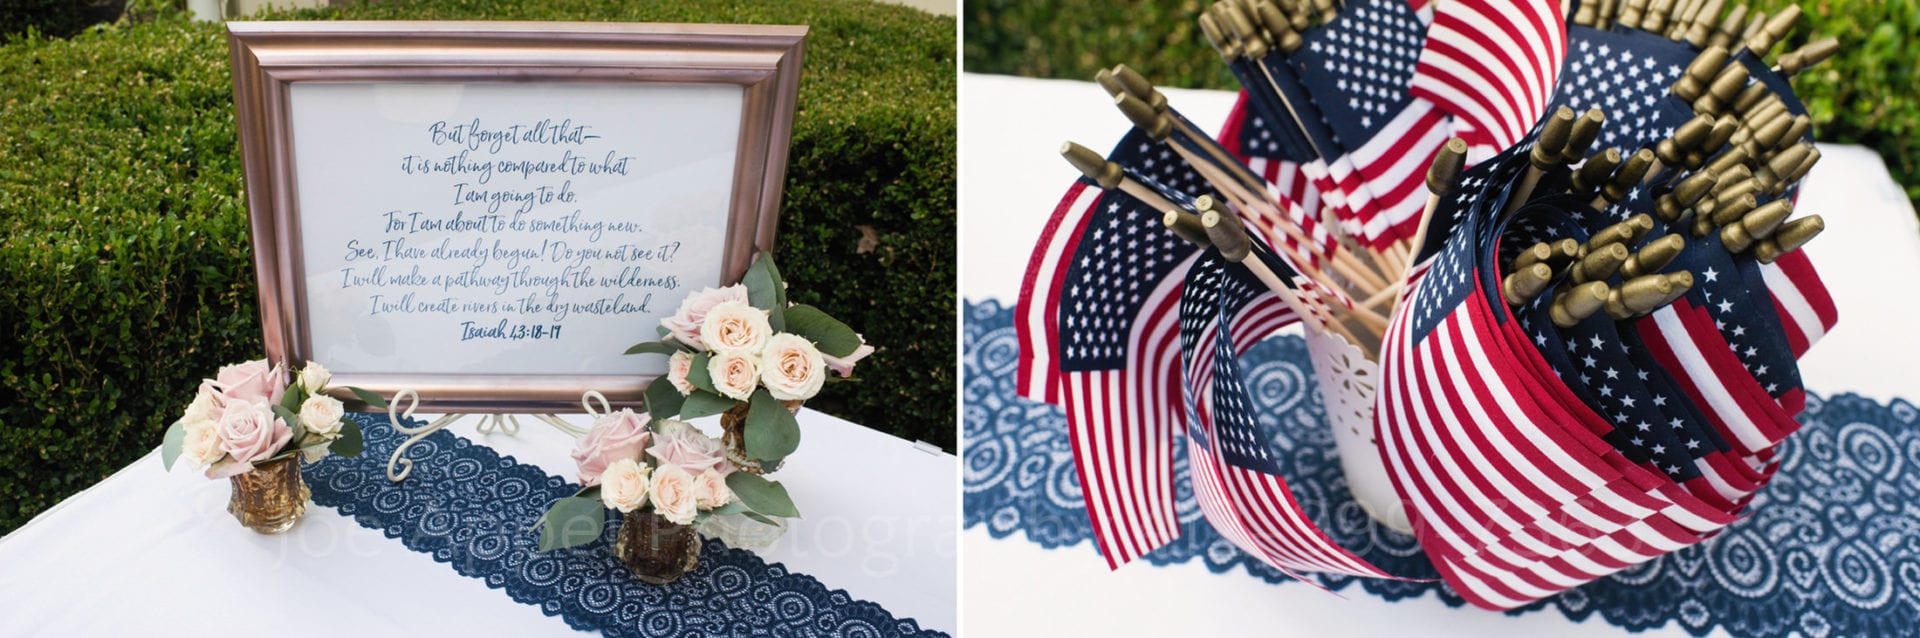 Two pictures: One shows a framed verse of Isaiah 43: 18-19 on a table with pink roses. The second photo is a vase filled with small American flags for wedding guests sitting on the same table during their Omni Bedford Springs Resort Wedding.